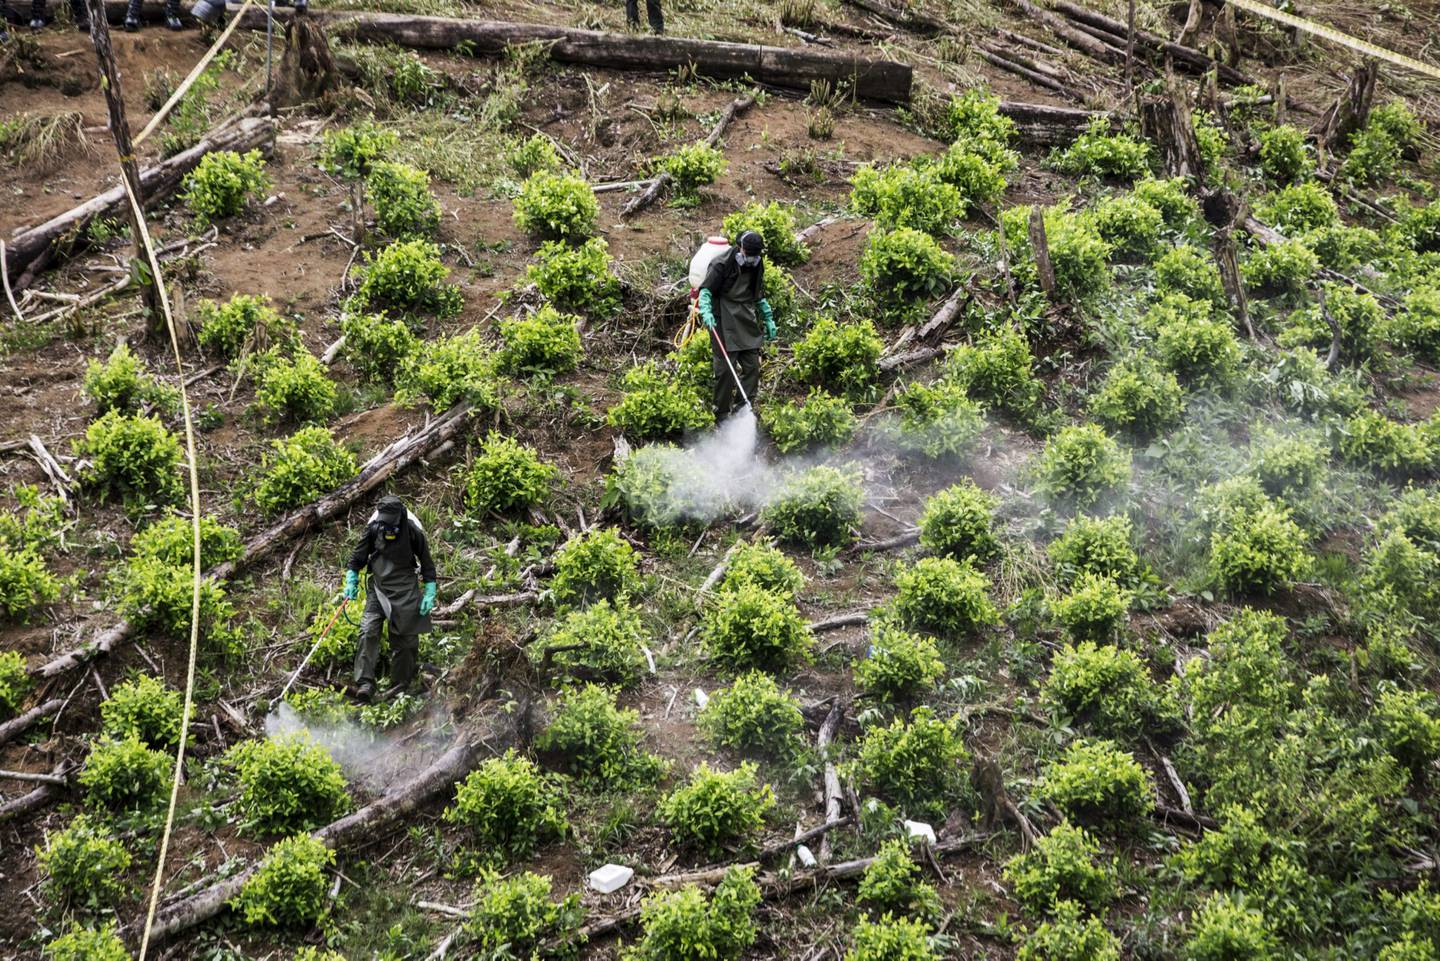 Colombian anti-narcotics police spray glyphosate on a coca field in Tumaco, in Nariño department, in May 2019.